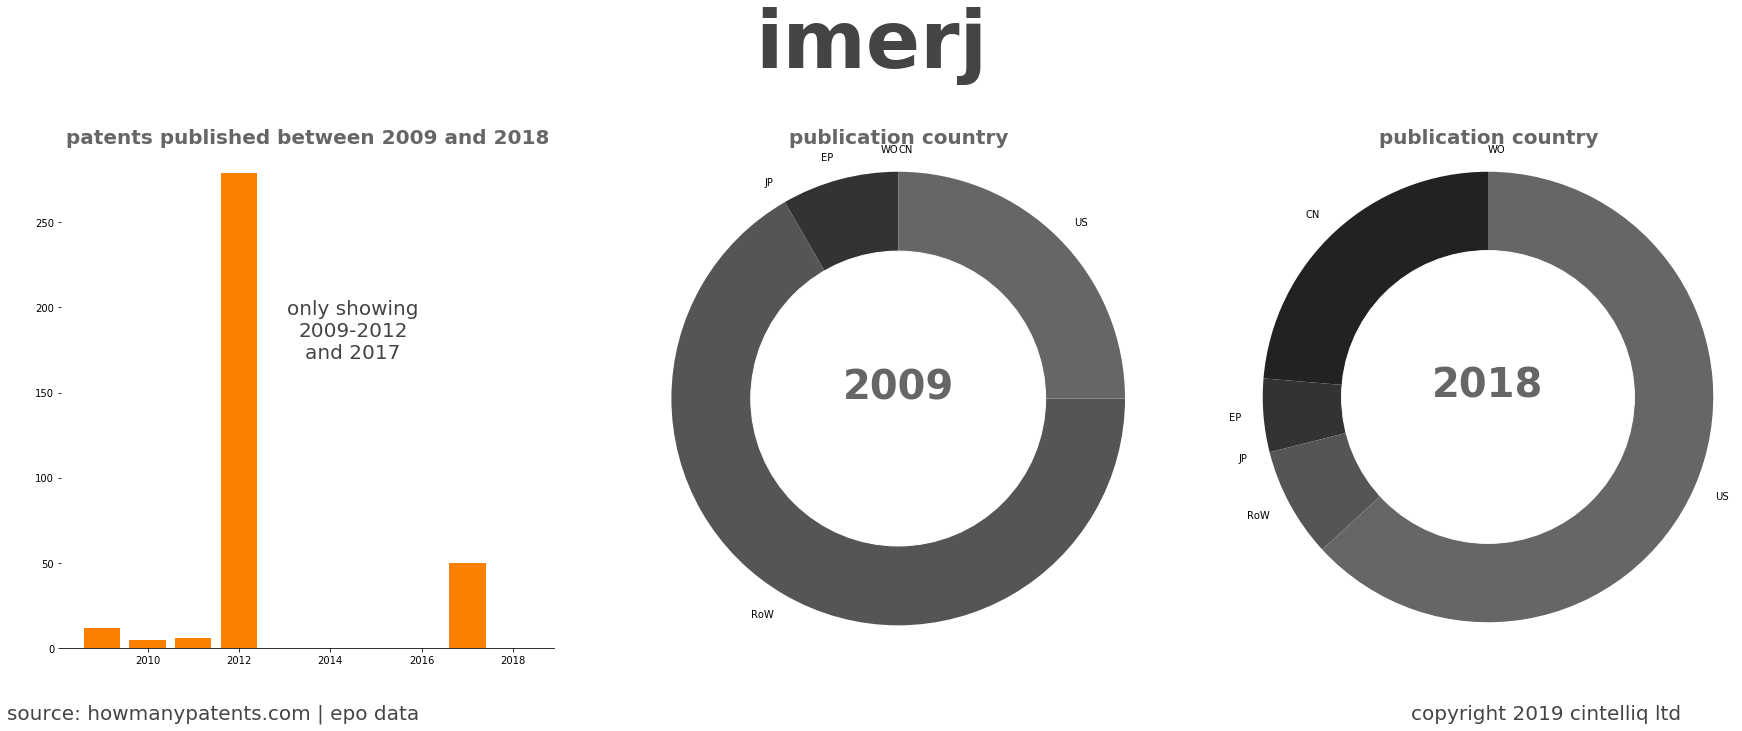 summary of patents for Imerj